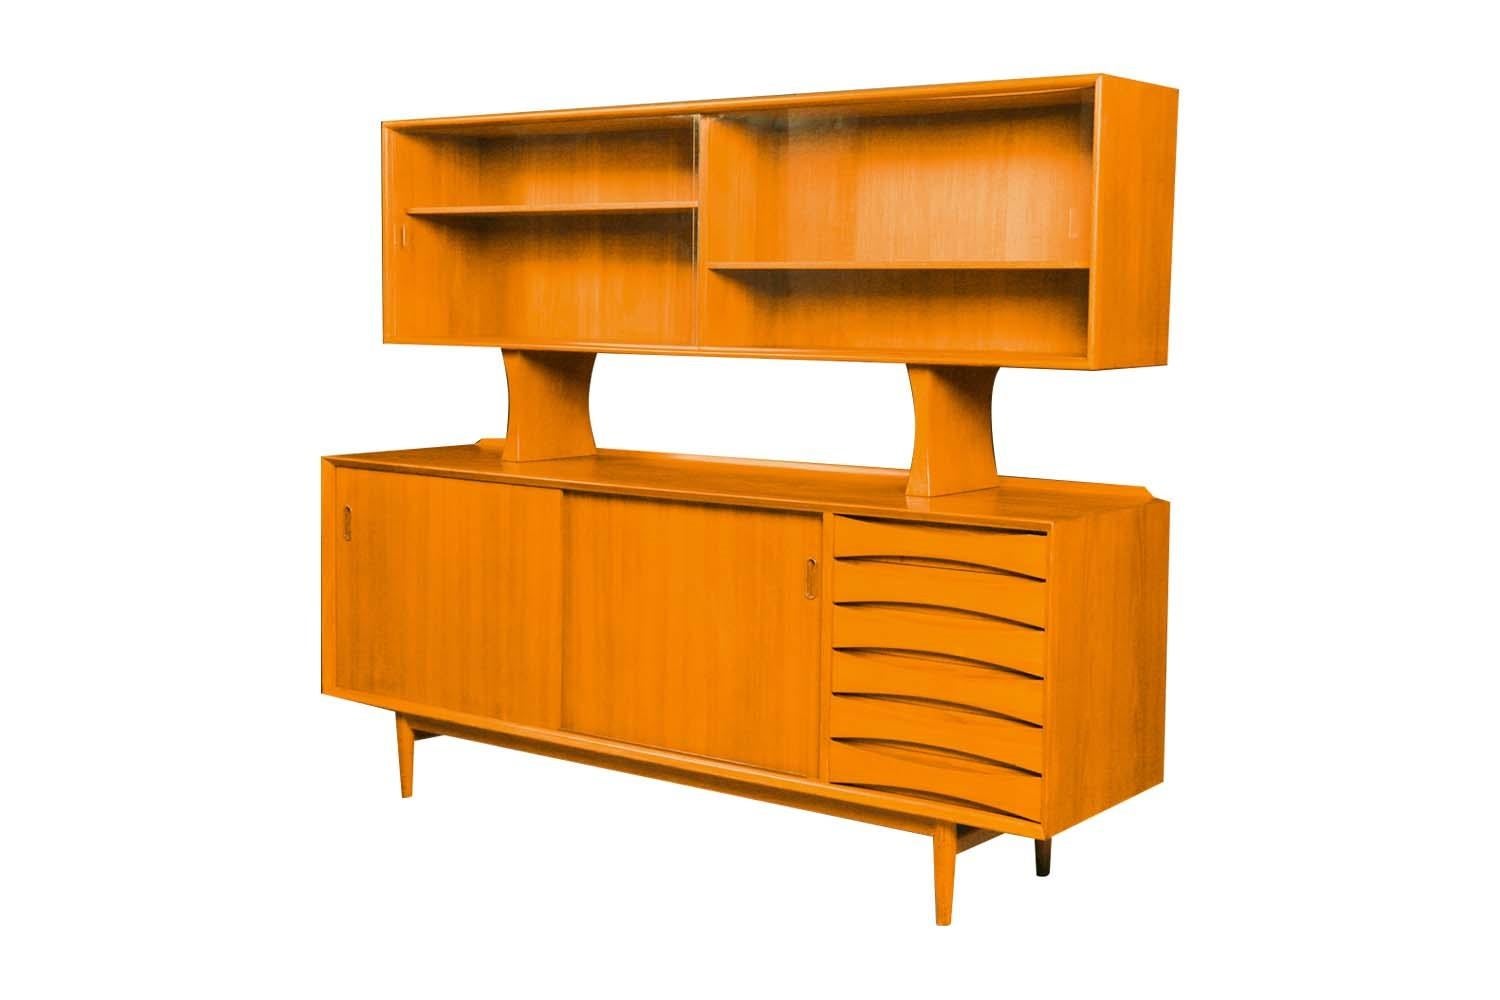 Exceptional Mid Century teak two-piece, rare, floating hutch, reversible sliding door, credenza model OS-29 designed by Arne Vodder for Sibast Mobler made in Denmark, circa 1960’s. World famous for winning the Gold Medal at the 1958 Milan Triennale